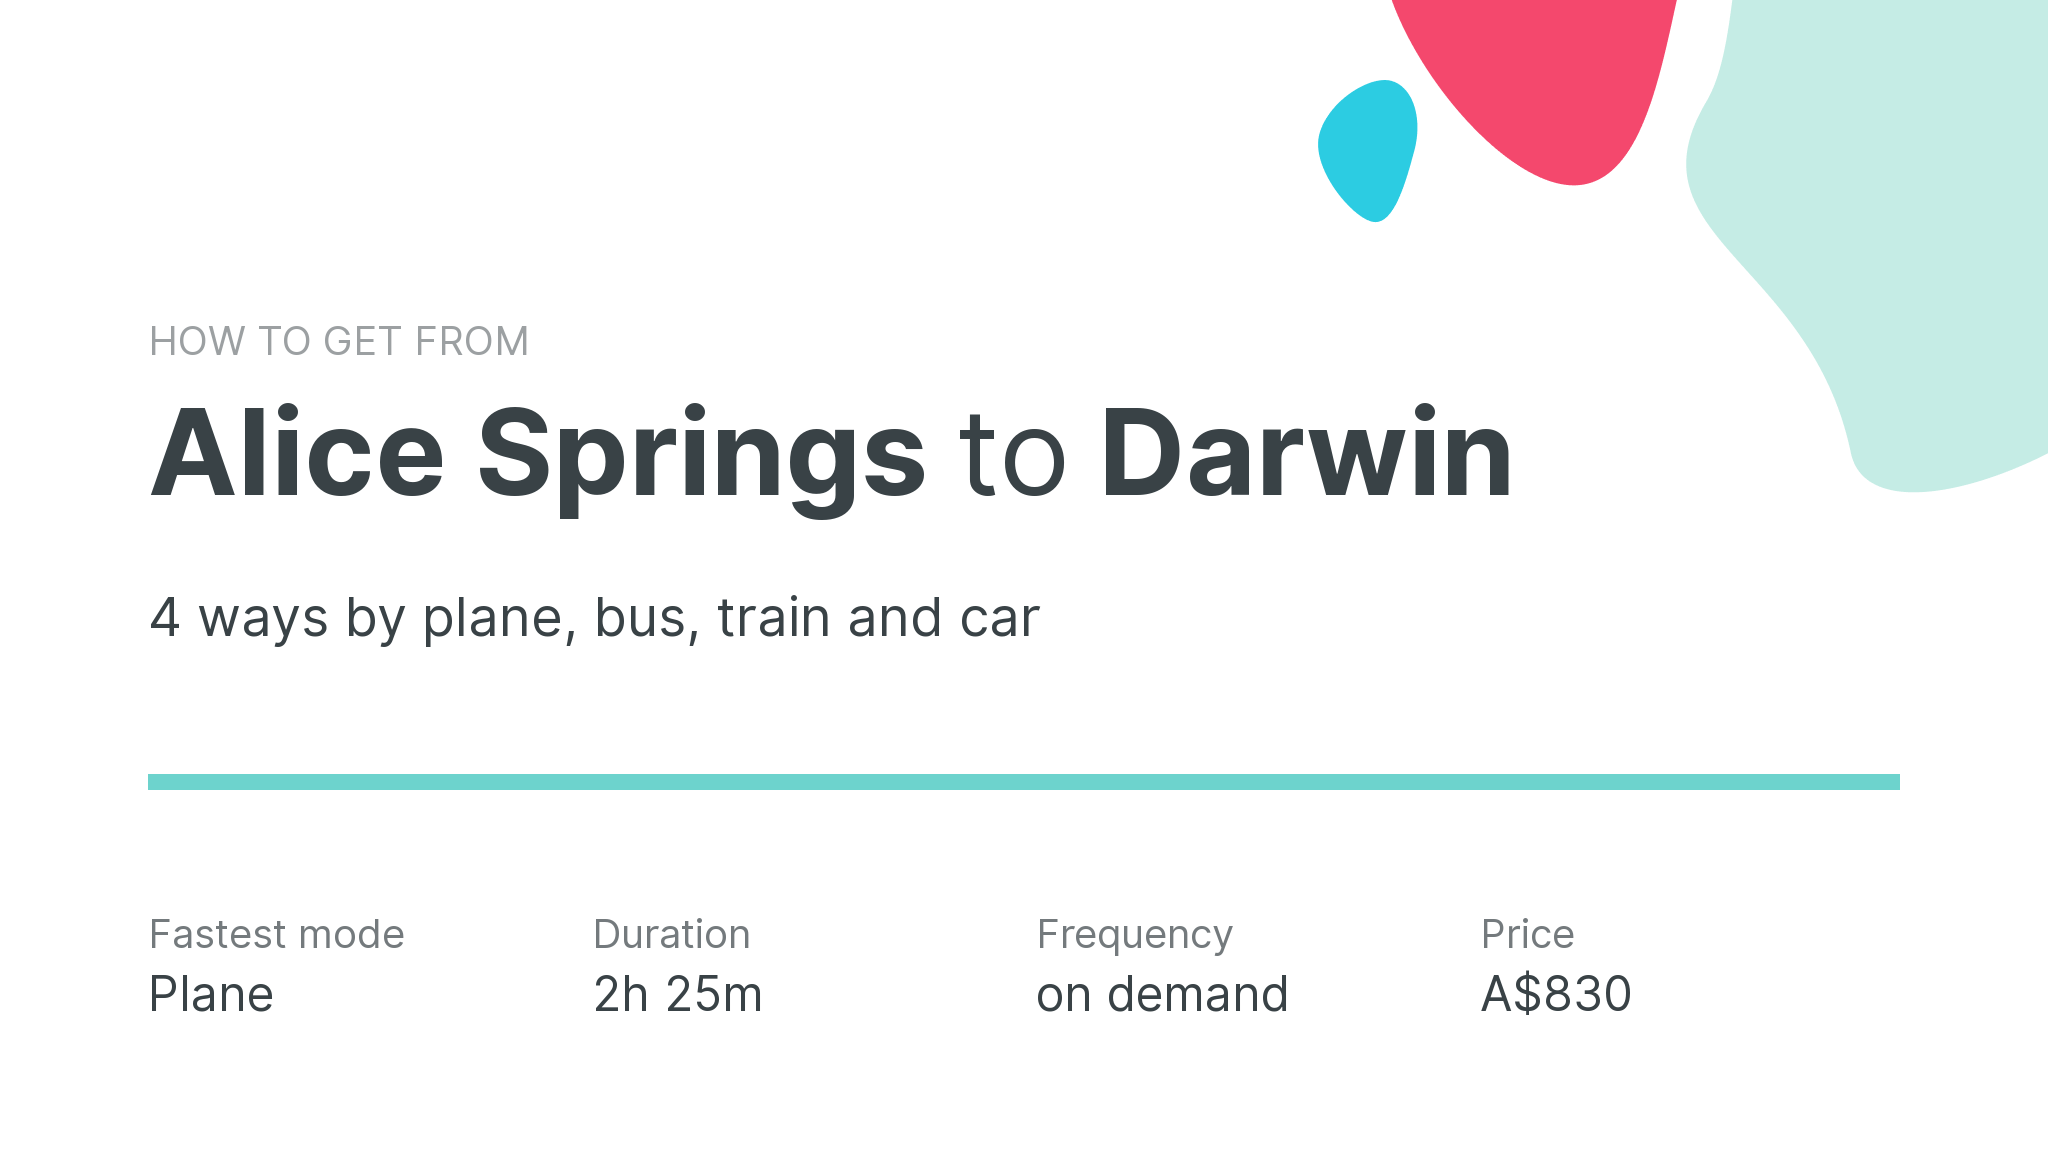 How do I get from Alice Springs to Darwin